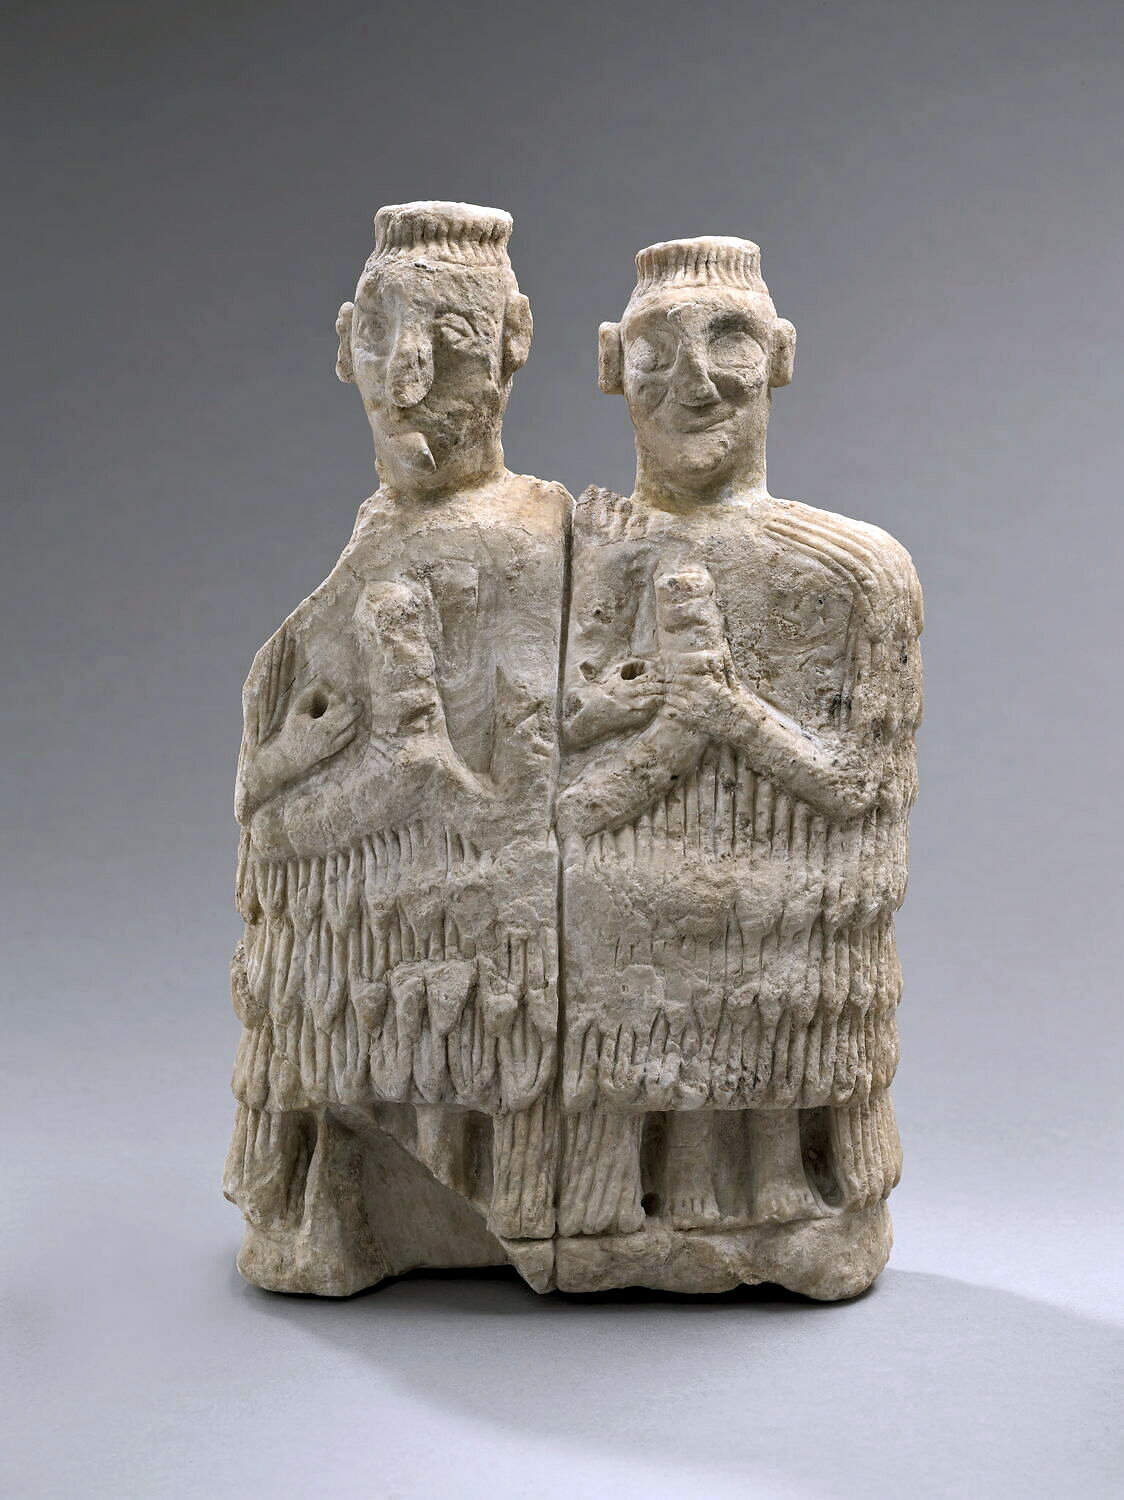 Gala Priests, from the Temple of Inanna at Mari, about 2450 BCE. Paris, Musée du Louvre